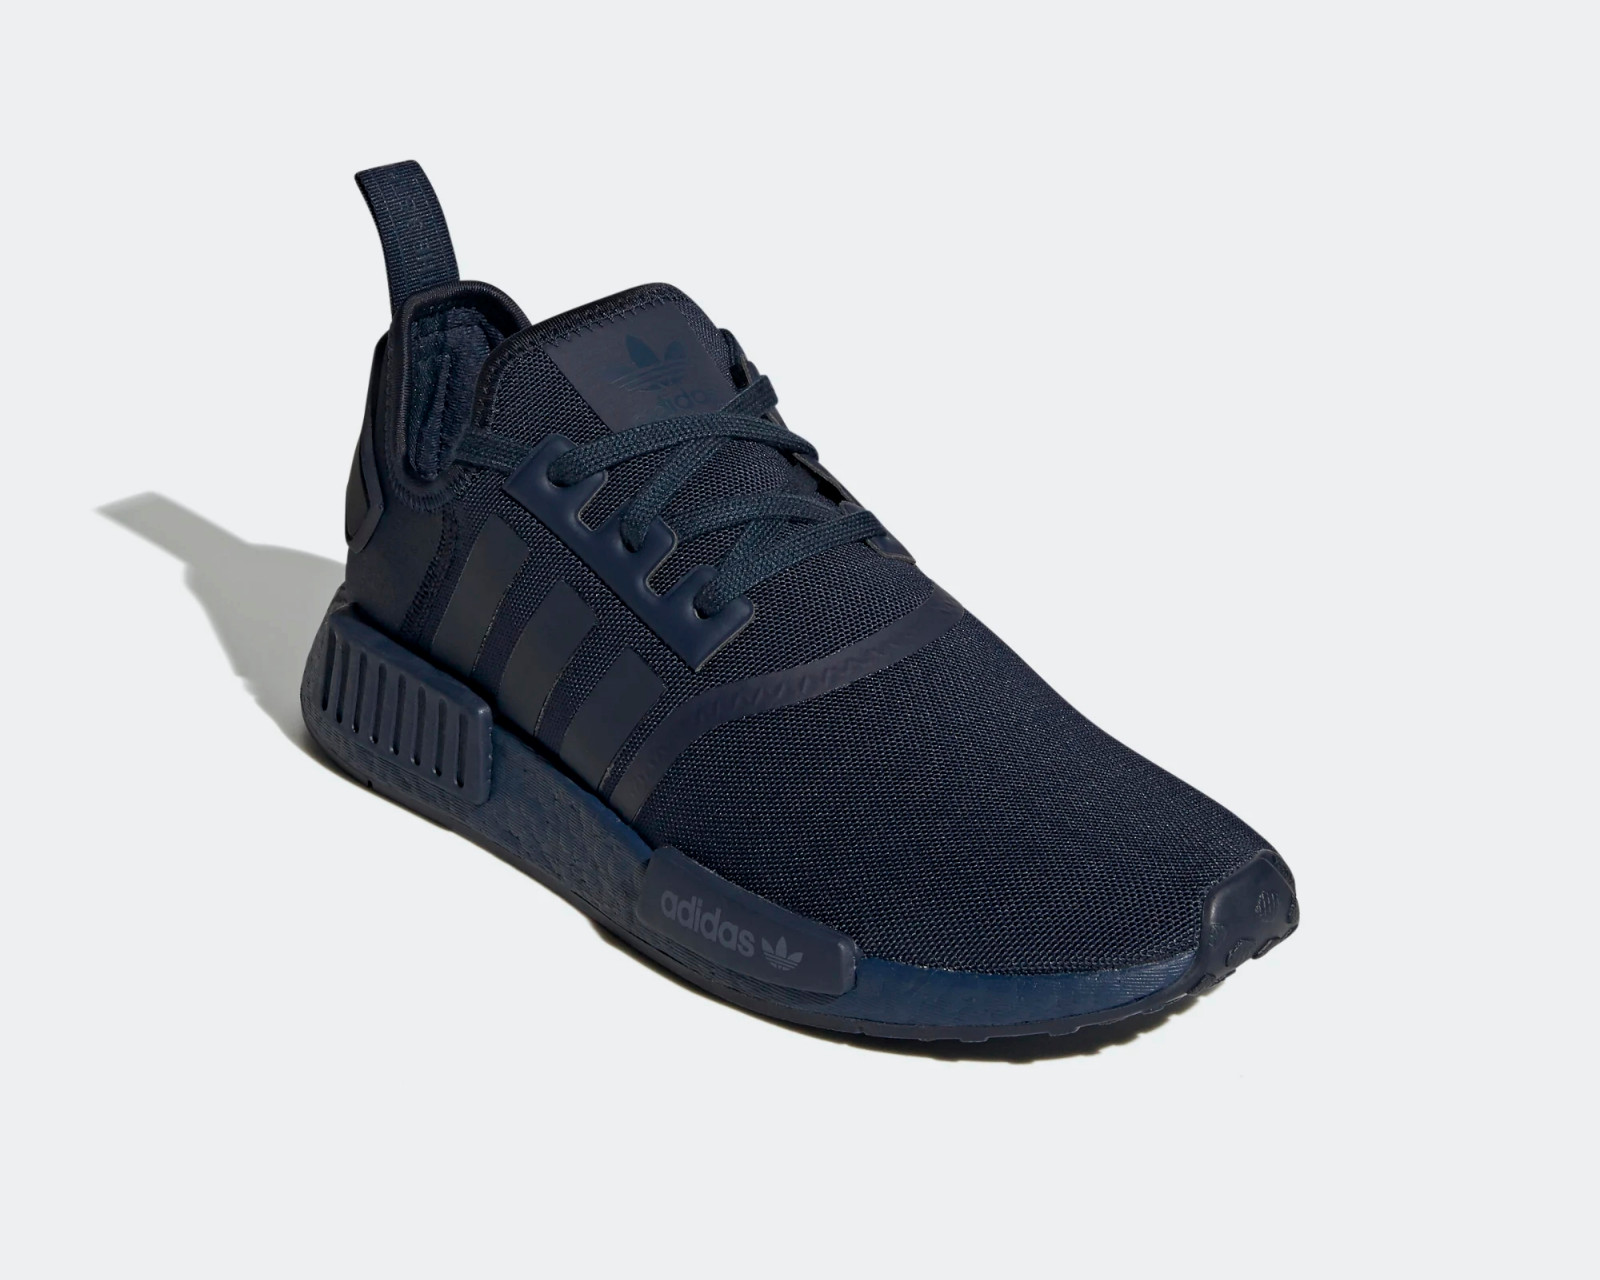 Adidas R1 Collegiate Navy Core Black Blue Shoes - champs yeezy early link locations in florida 2017 - StclaircomoShops